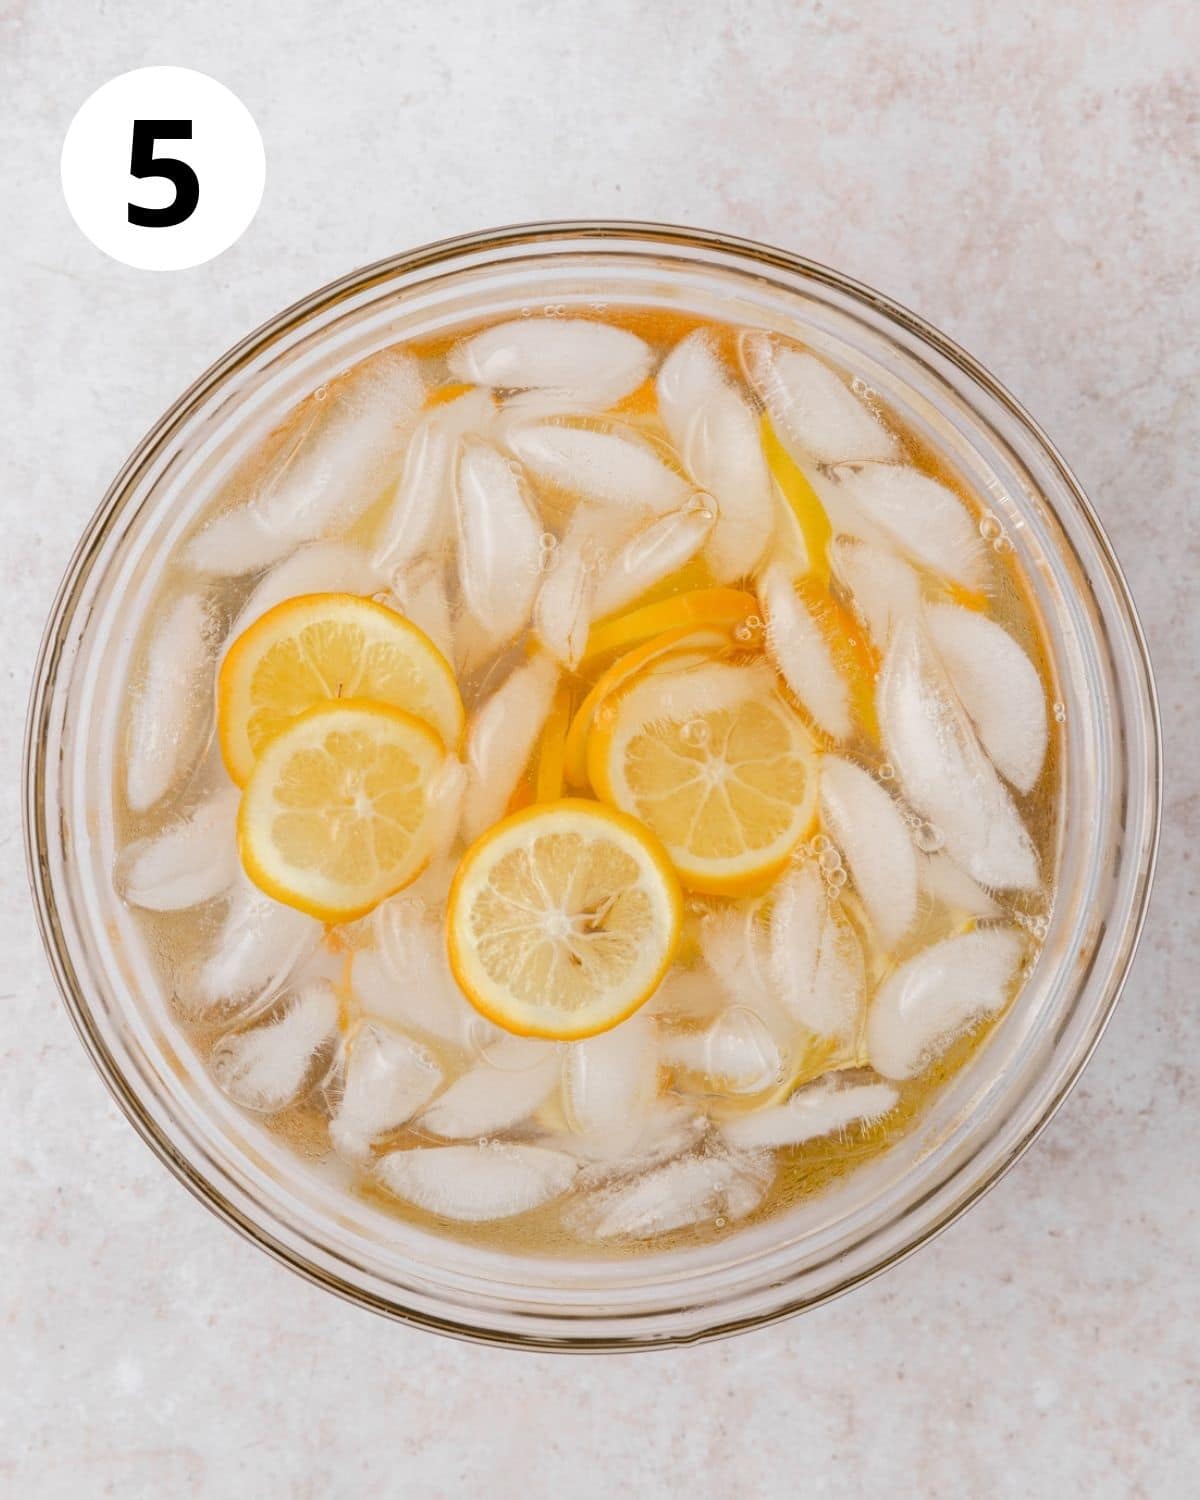 sliced lemons in an ice bath after blanching.